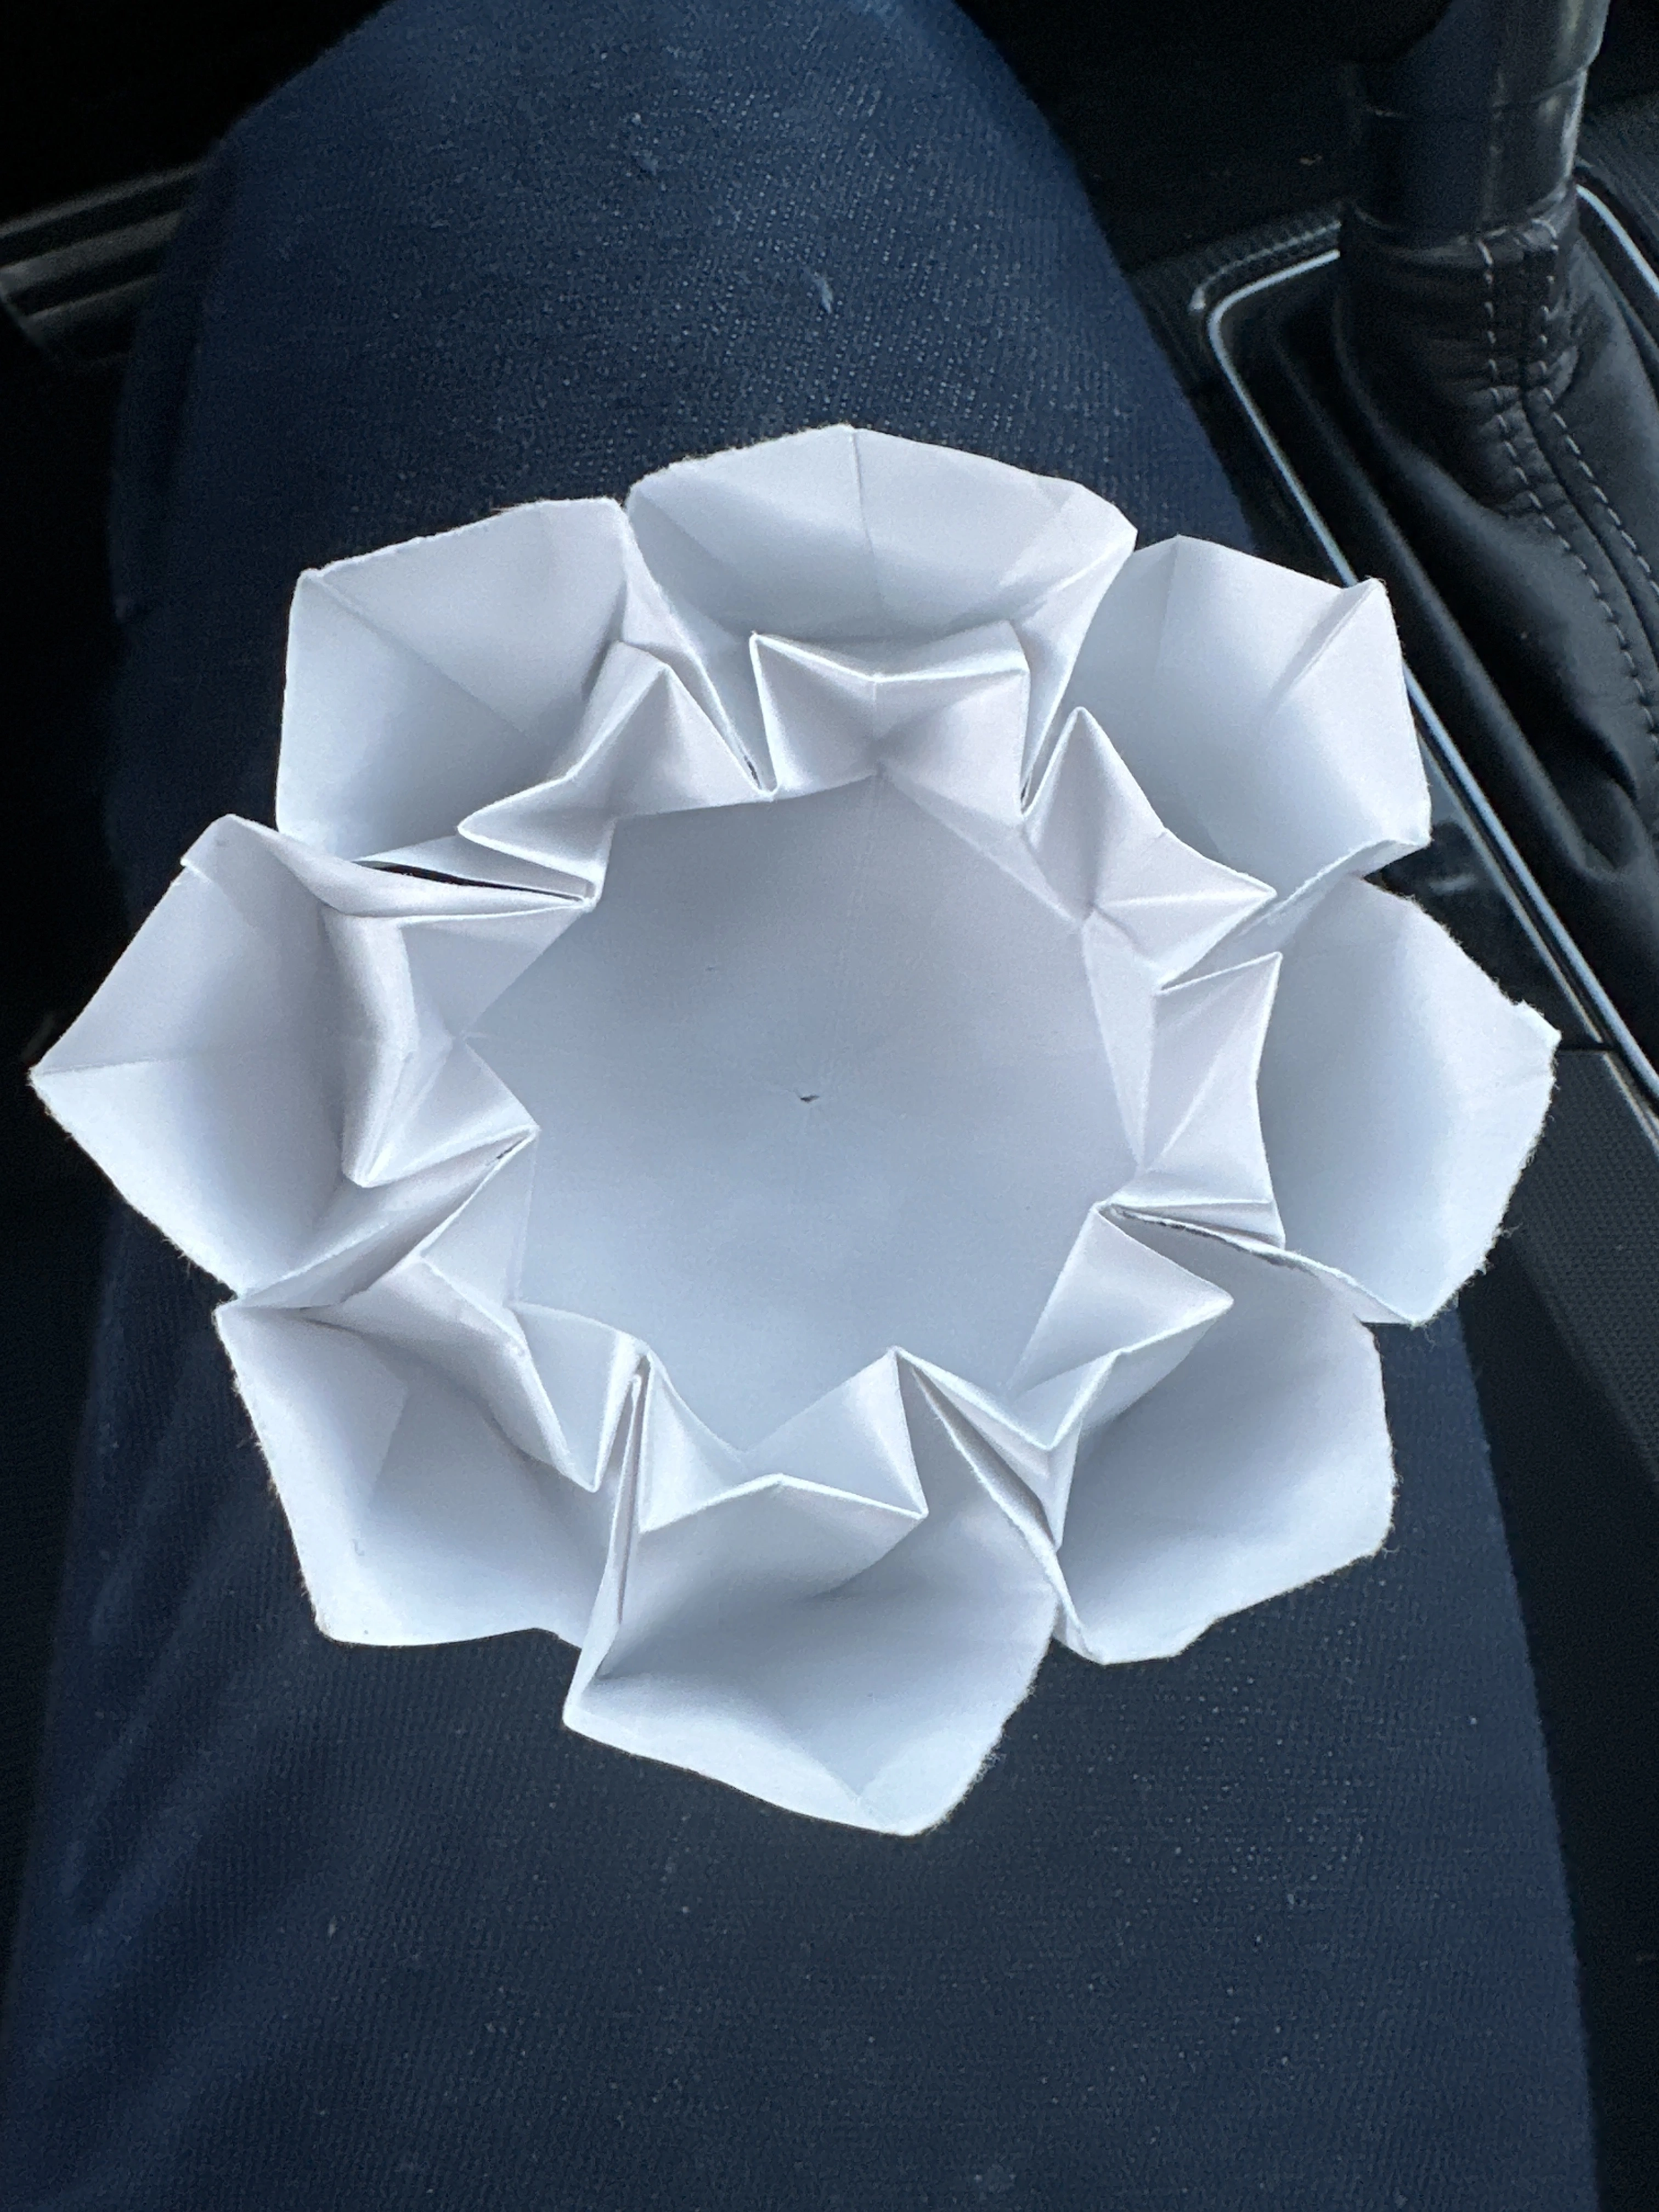 front of intricate geometric collapse origami creation